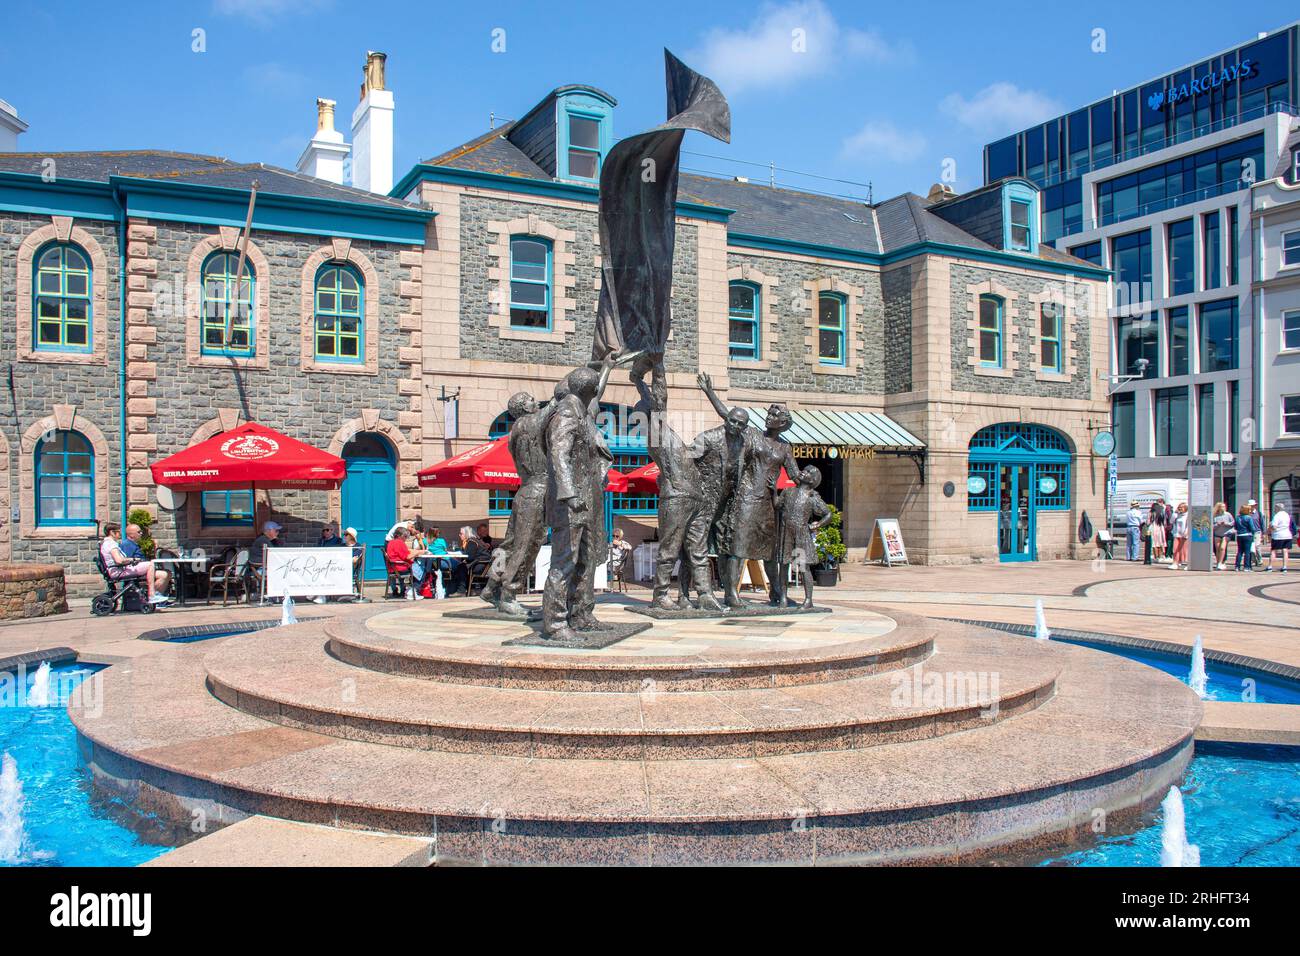 Liberation Monument and Liberty Wharf, Liberation Square, St Helier, Jersey, Channel Islands Stock Photo